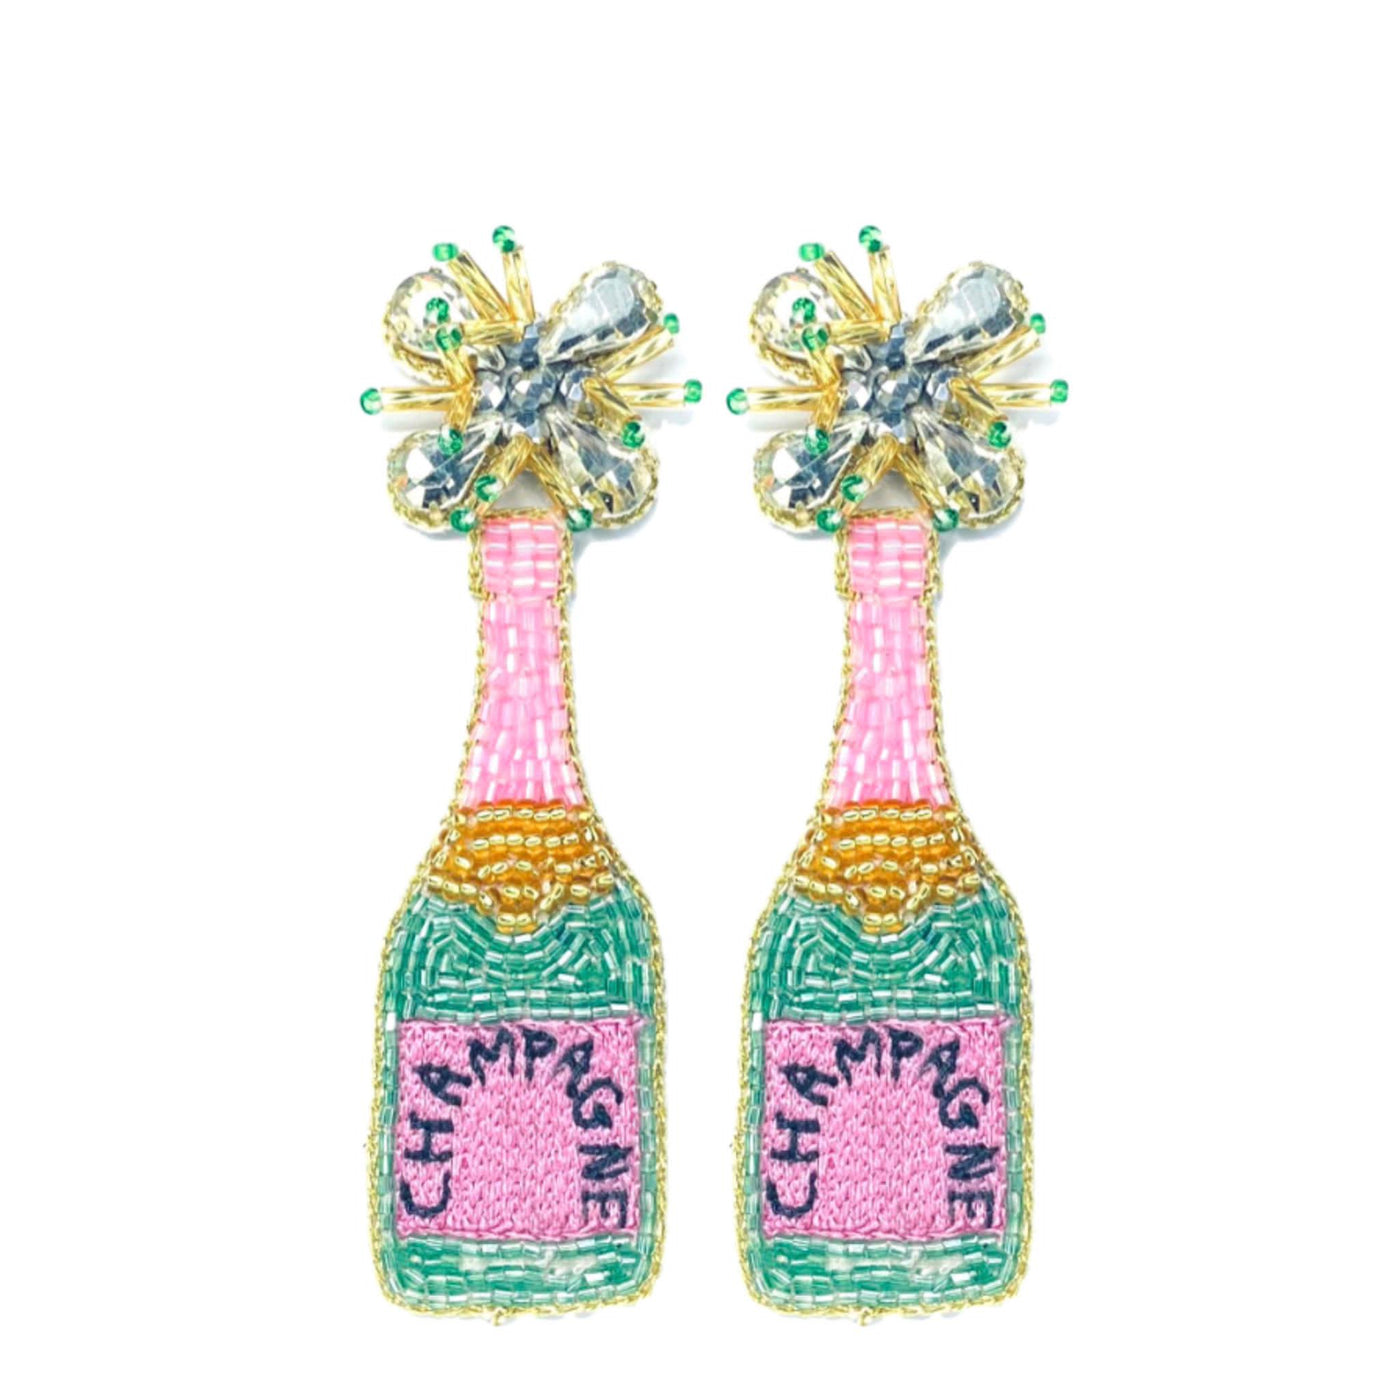 WS Champagne Bottle Earrings - Pink and Green